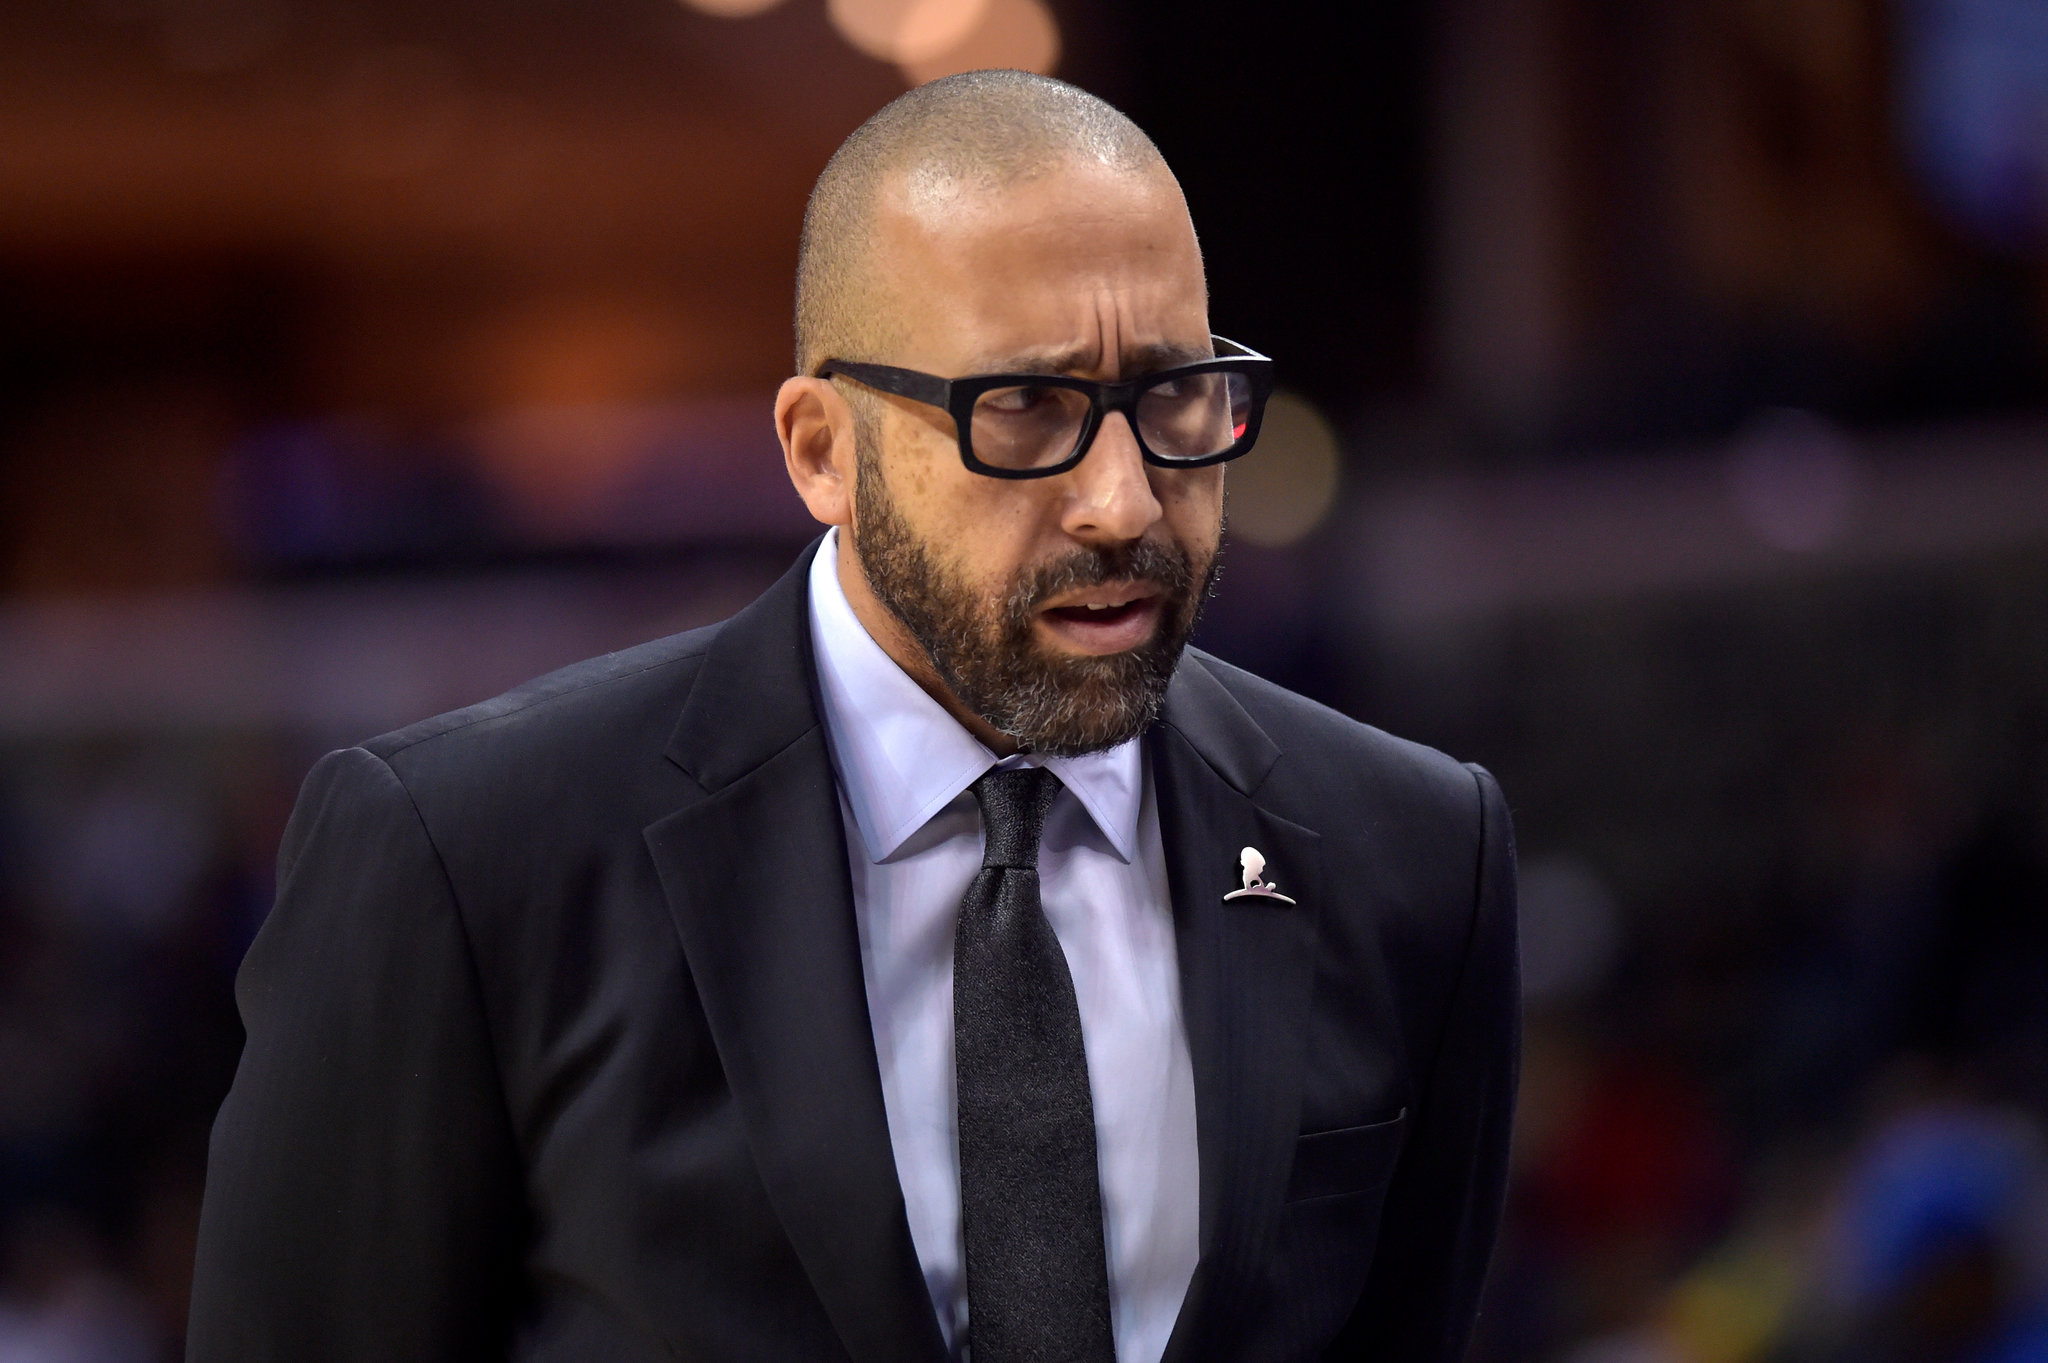 David Fizdale Is Said to Be Knicks' Next Coach - The New York Times